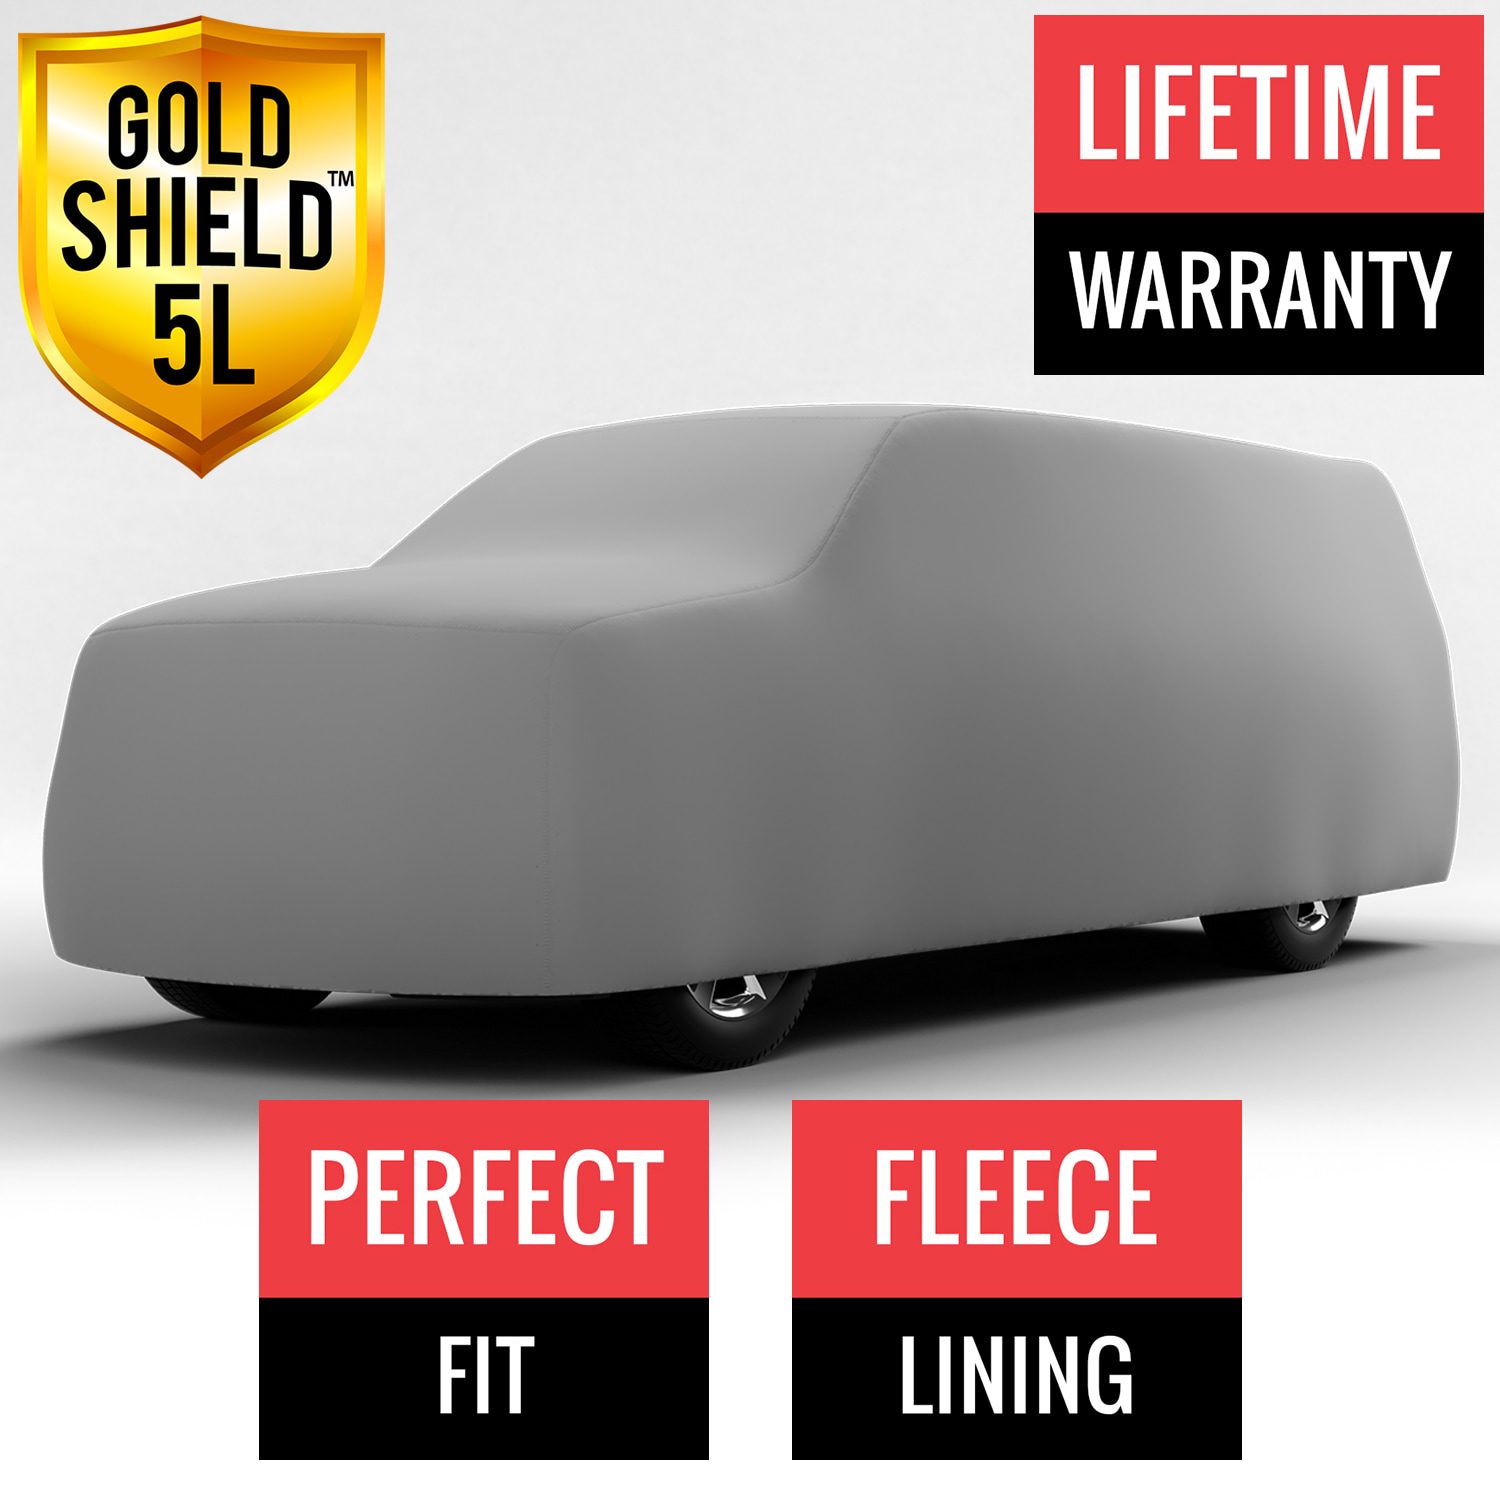 Gold Shield 5L - Car Cover for Toyota Pickup 1974 Regular Cab Pickup 2-Door Short Bed with Camper Shell